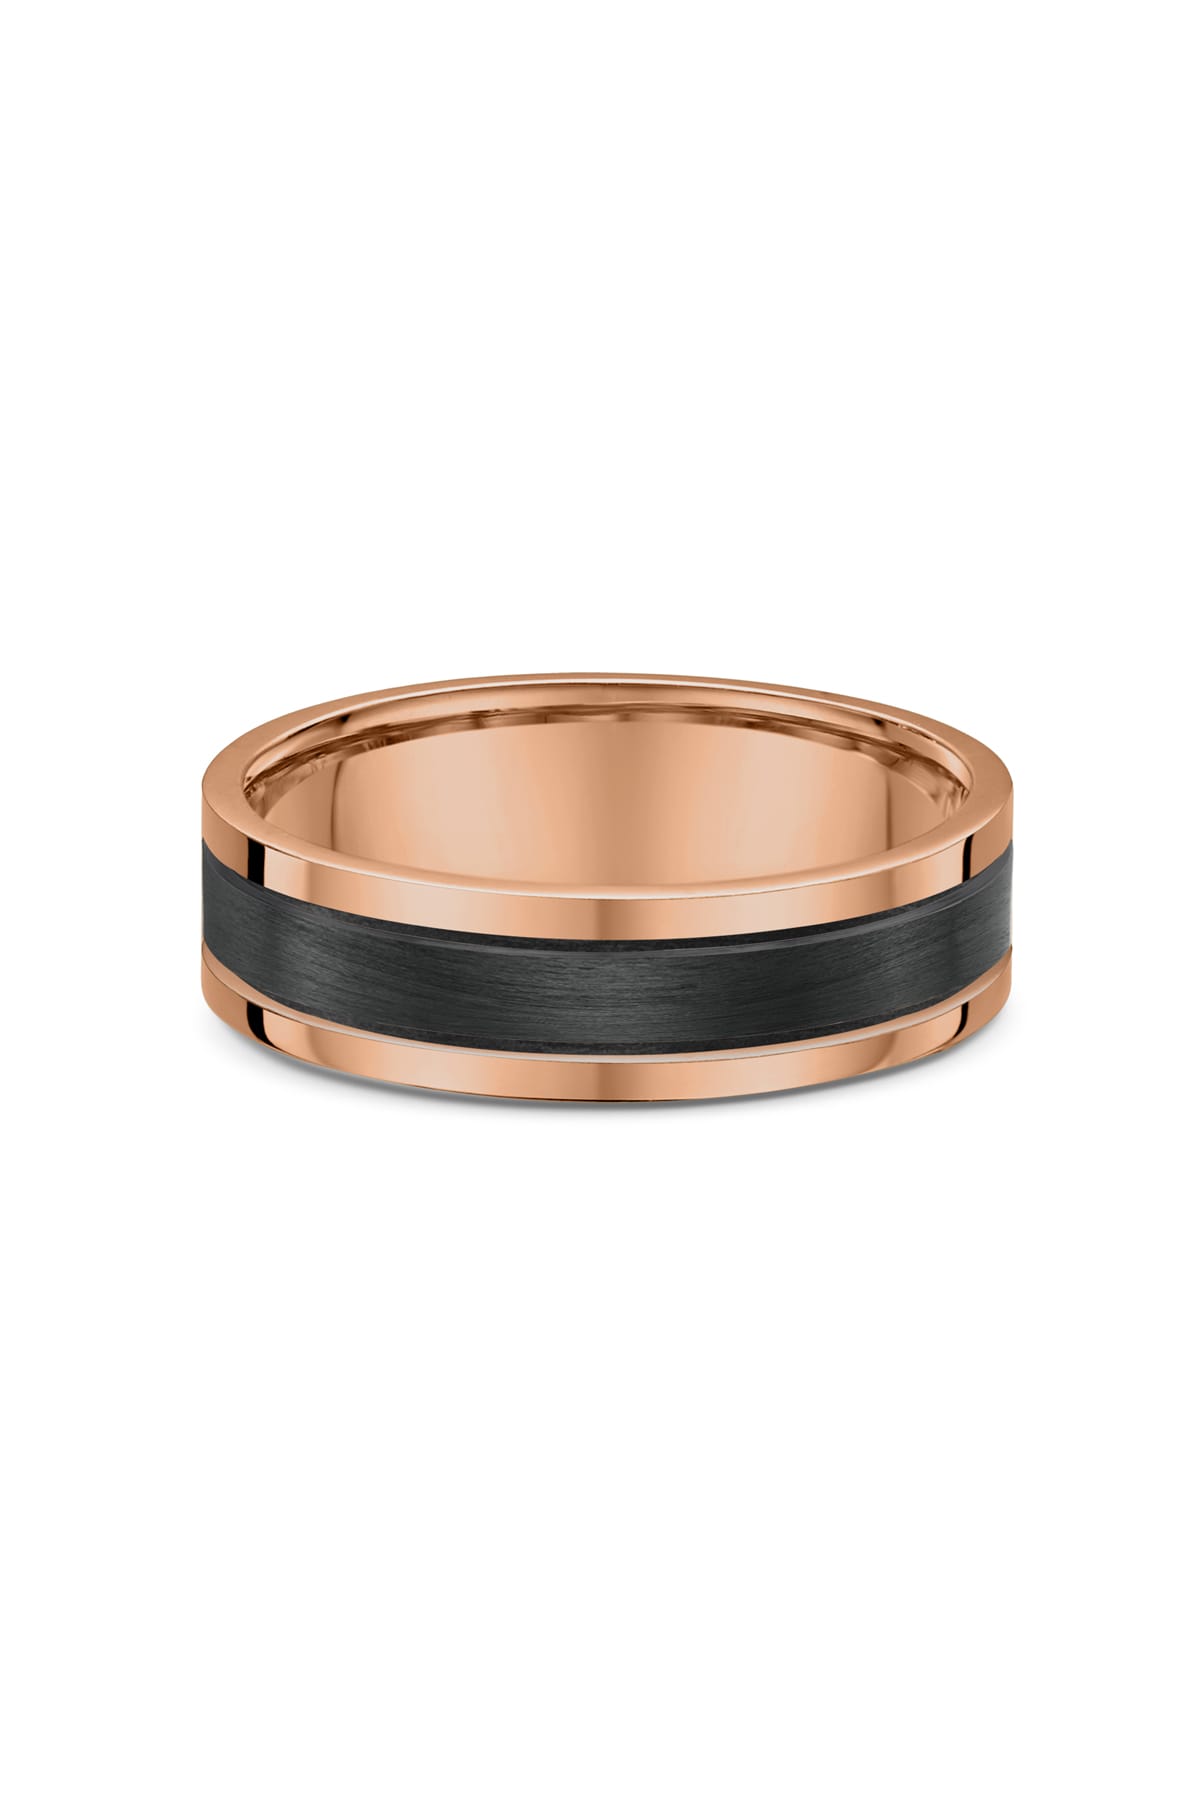 Men's Wedding Ring in Rose Gold available at LeGassick Diamonds and Jewellery Gold Coast, Australia.